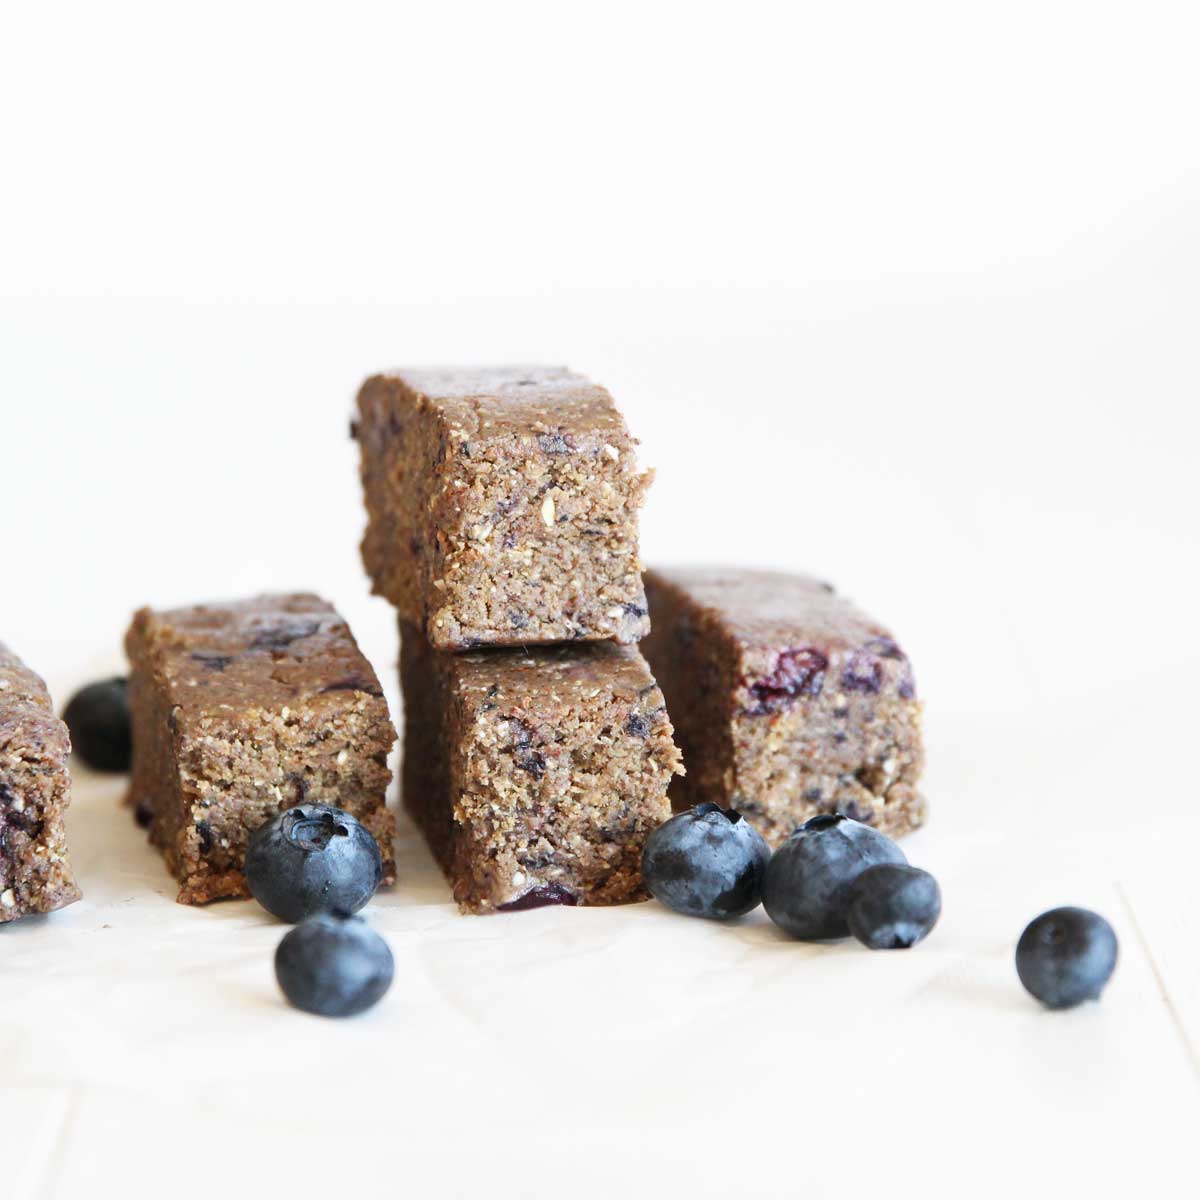 Homemade Blueberry Oatmeal Protein Bars (Healthy, Wholesome Vegan Recipe!) - Peanut Butter Glaze